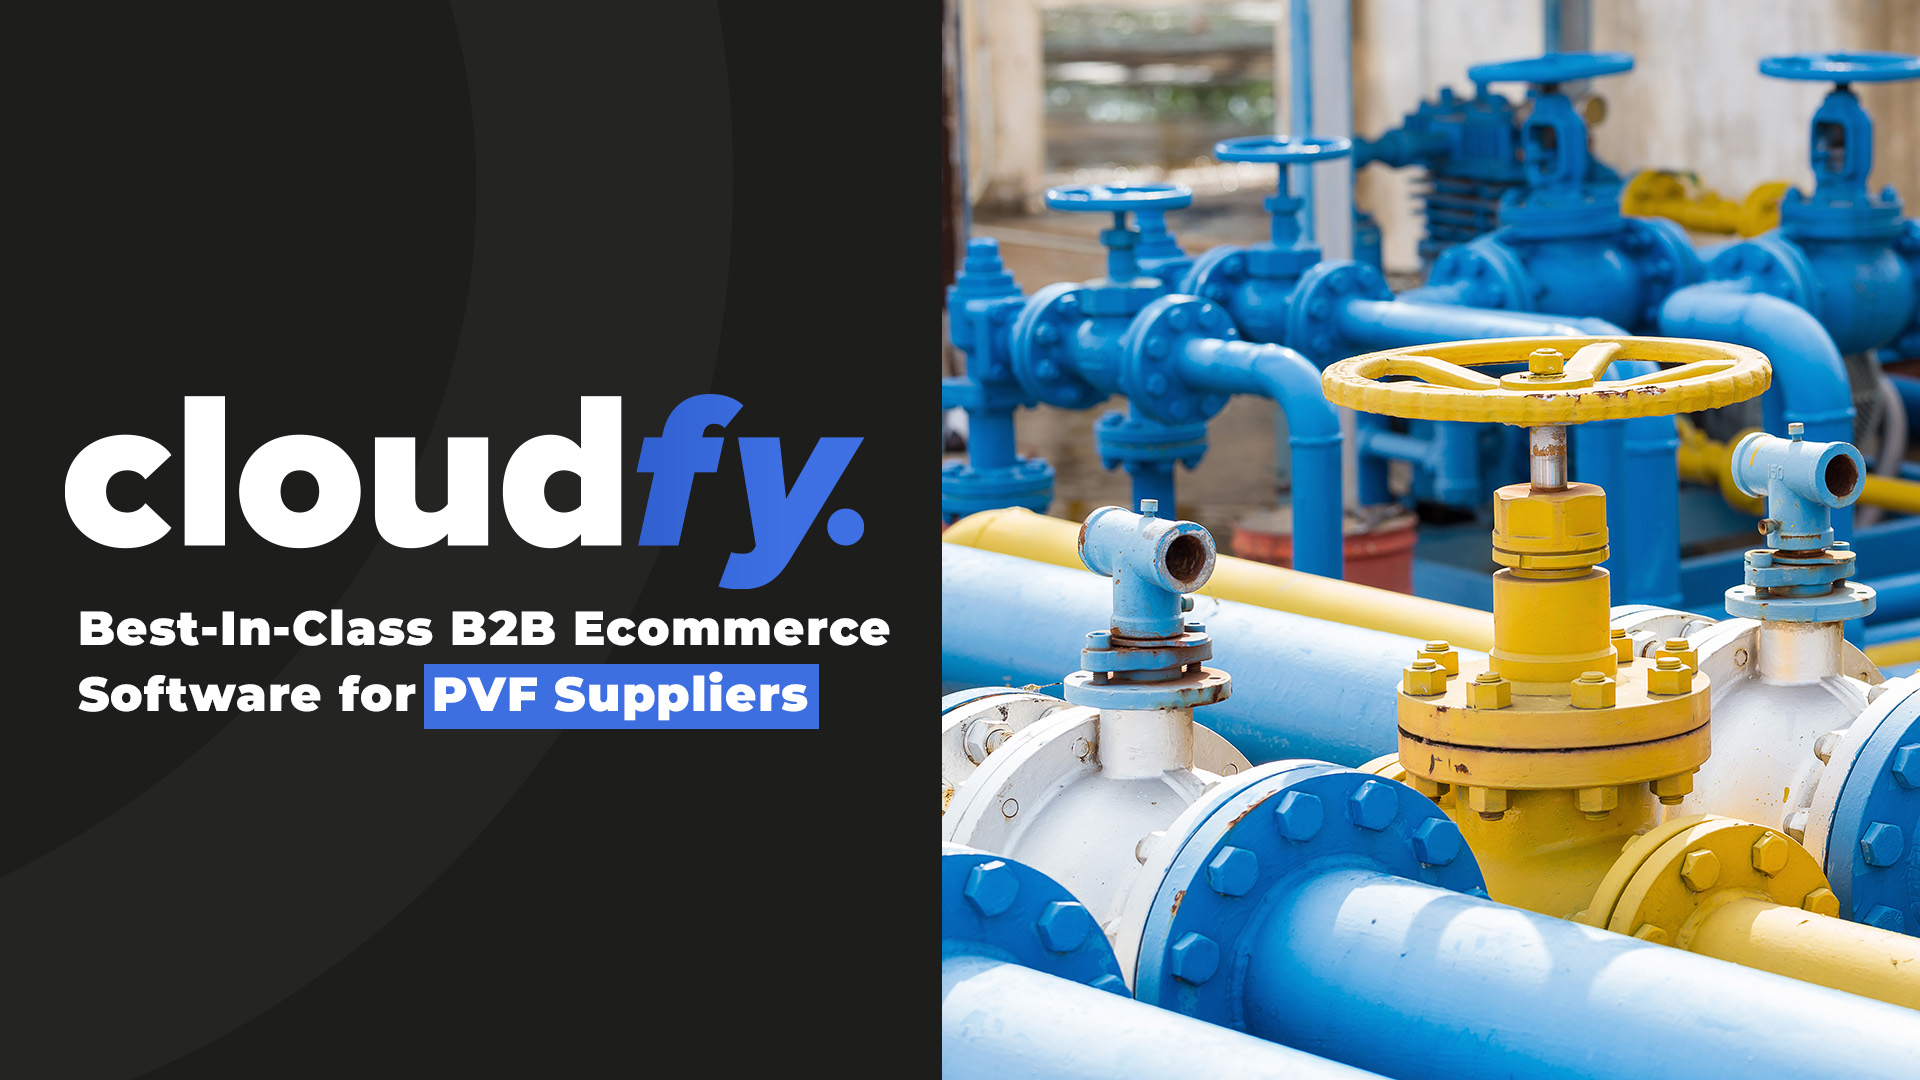 B2B Ecommerce For PVF Suppliers